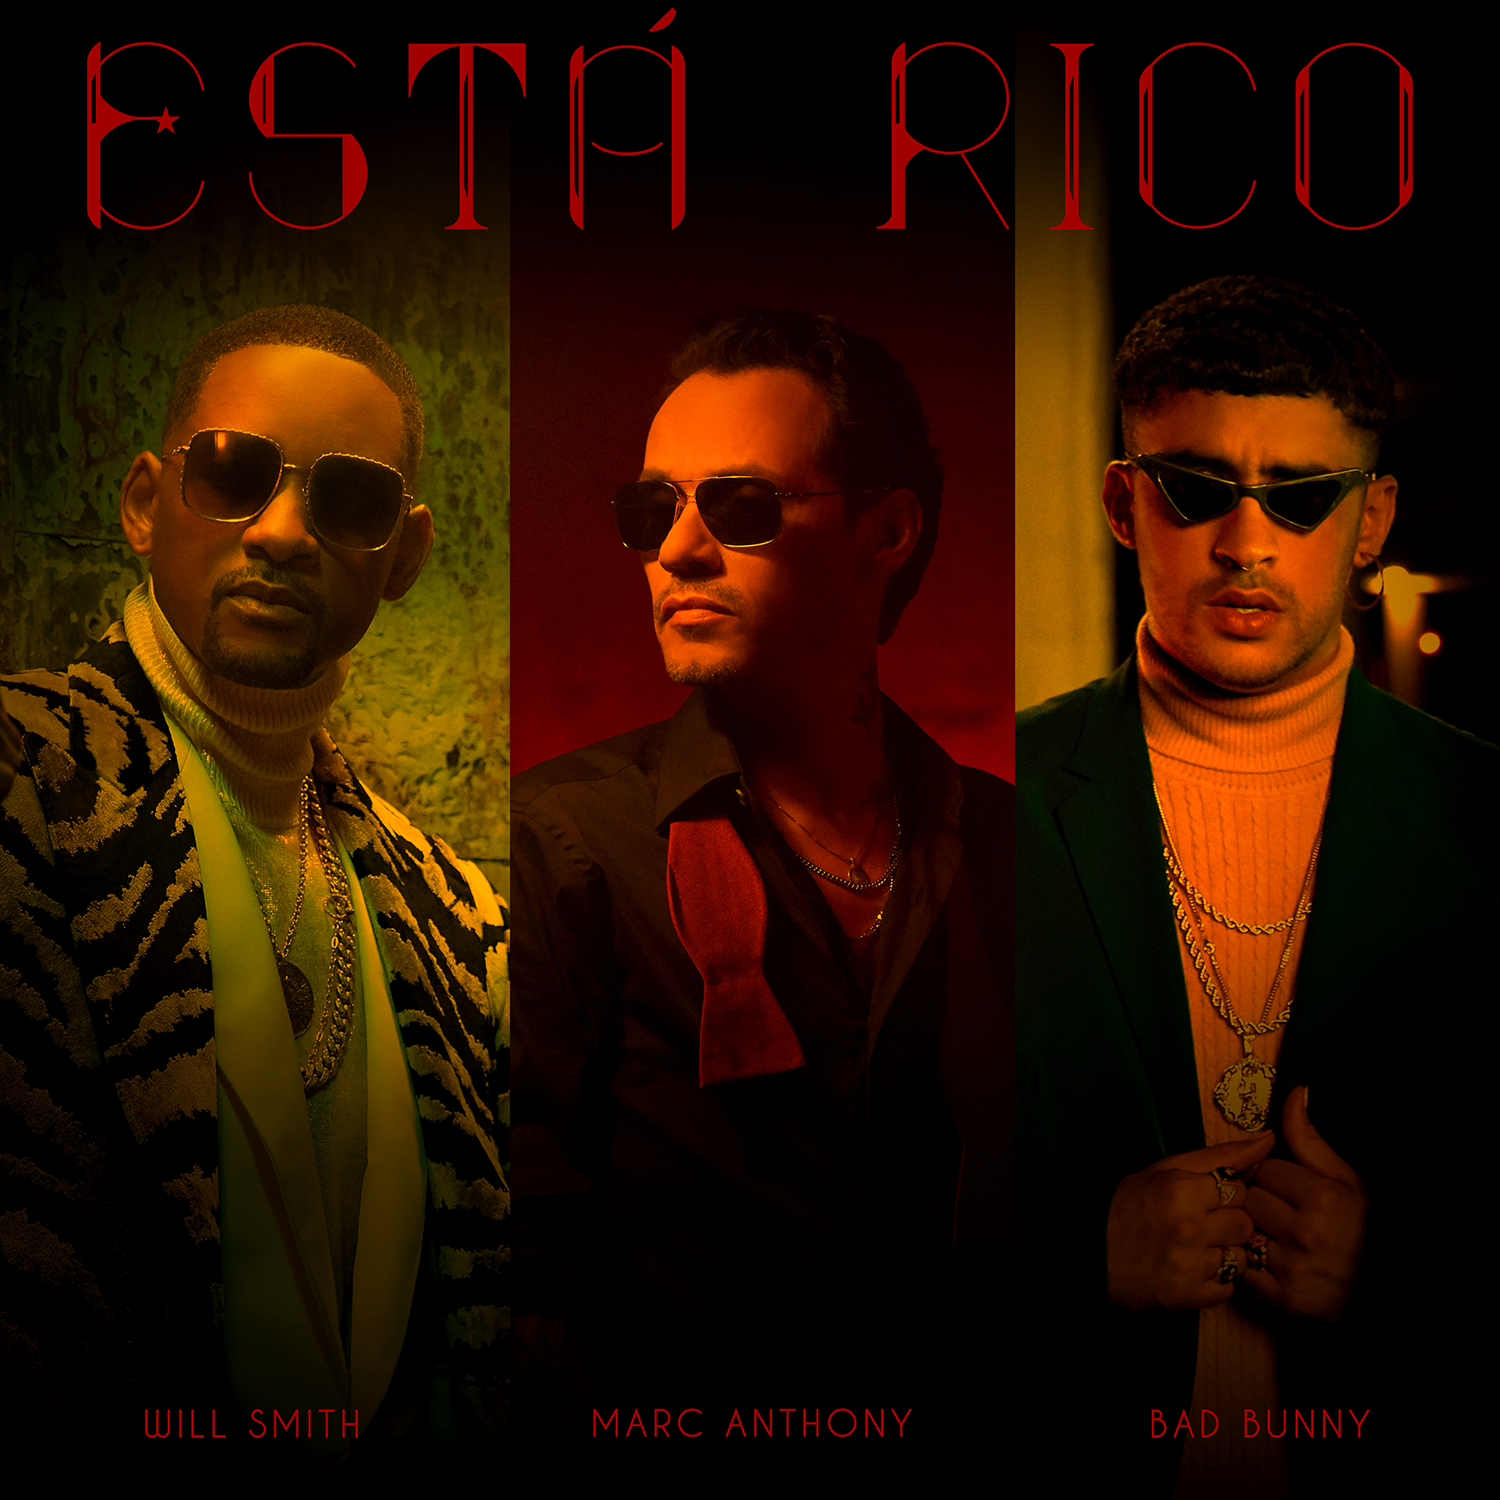 MARC ANTHONY, WILL SMITH AND BAD BUNNY TEAM UP FOR  “ESTÁ RICO”